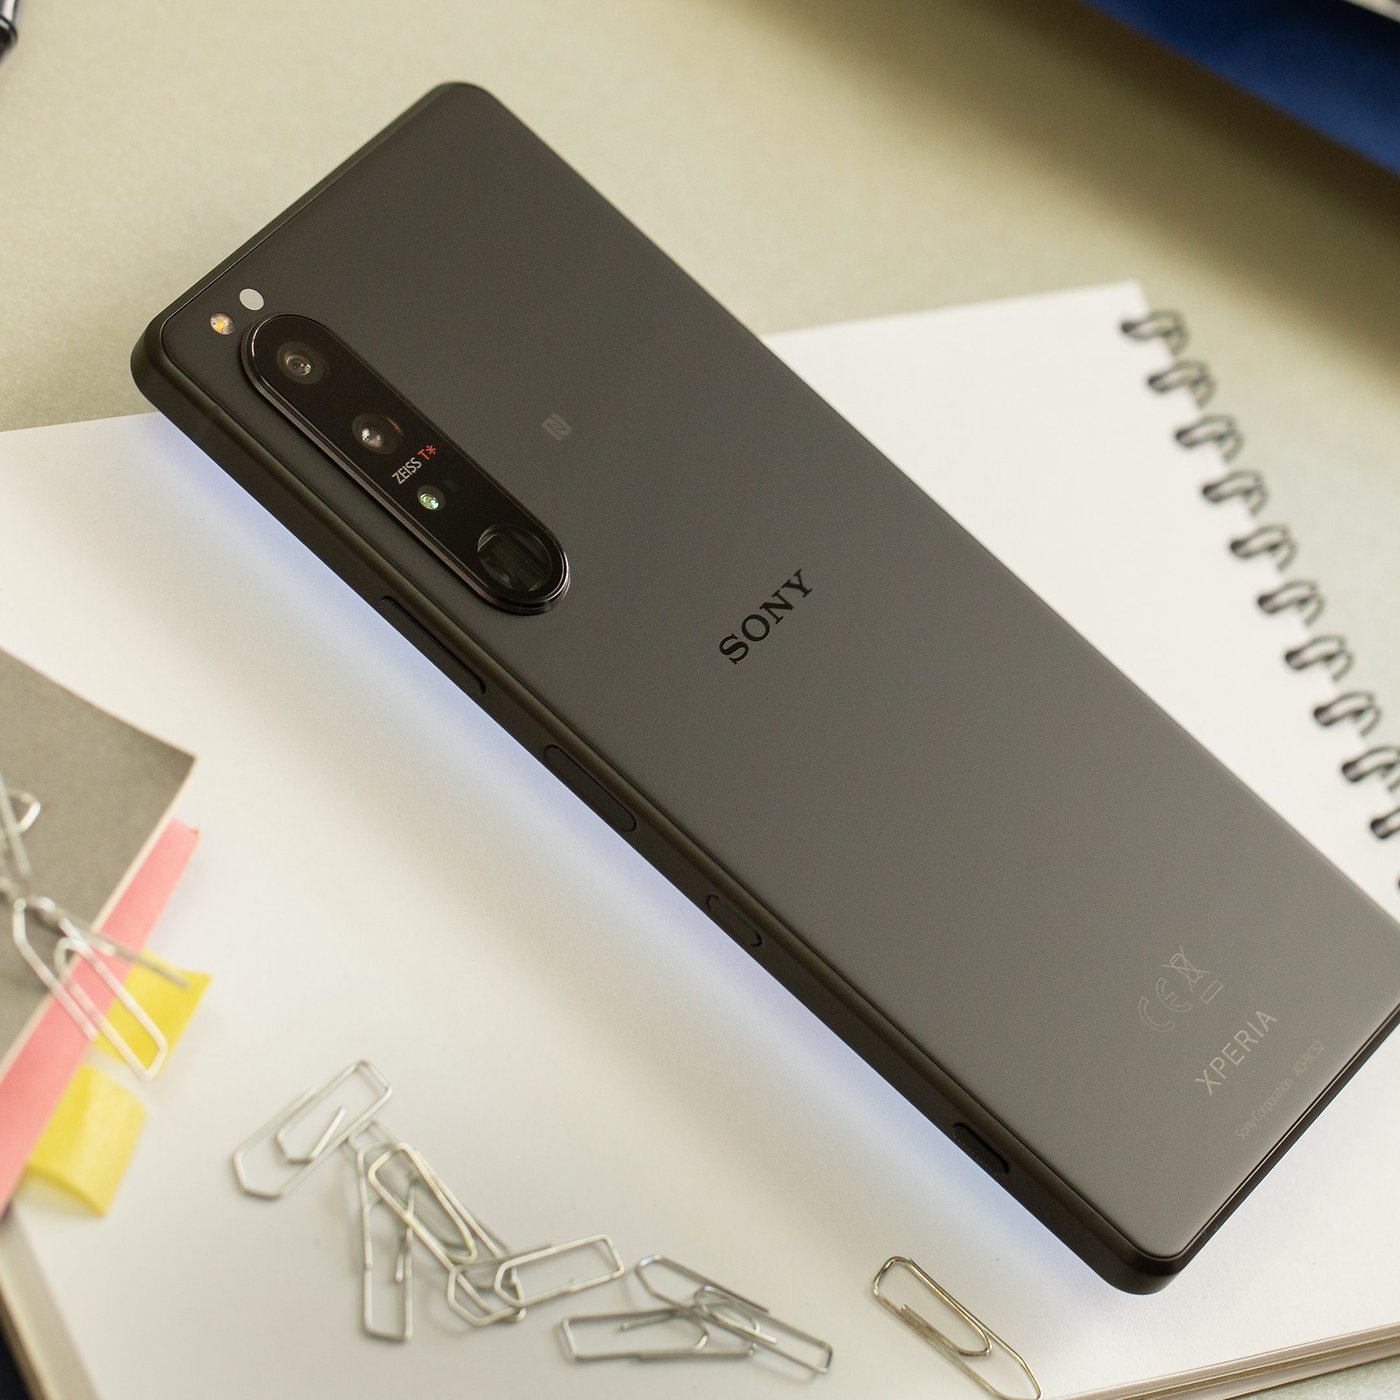 spanning Ithaca snor Sony Xperia 1 III review: The final enthusiast smartphone | NextPit